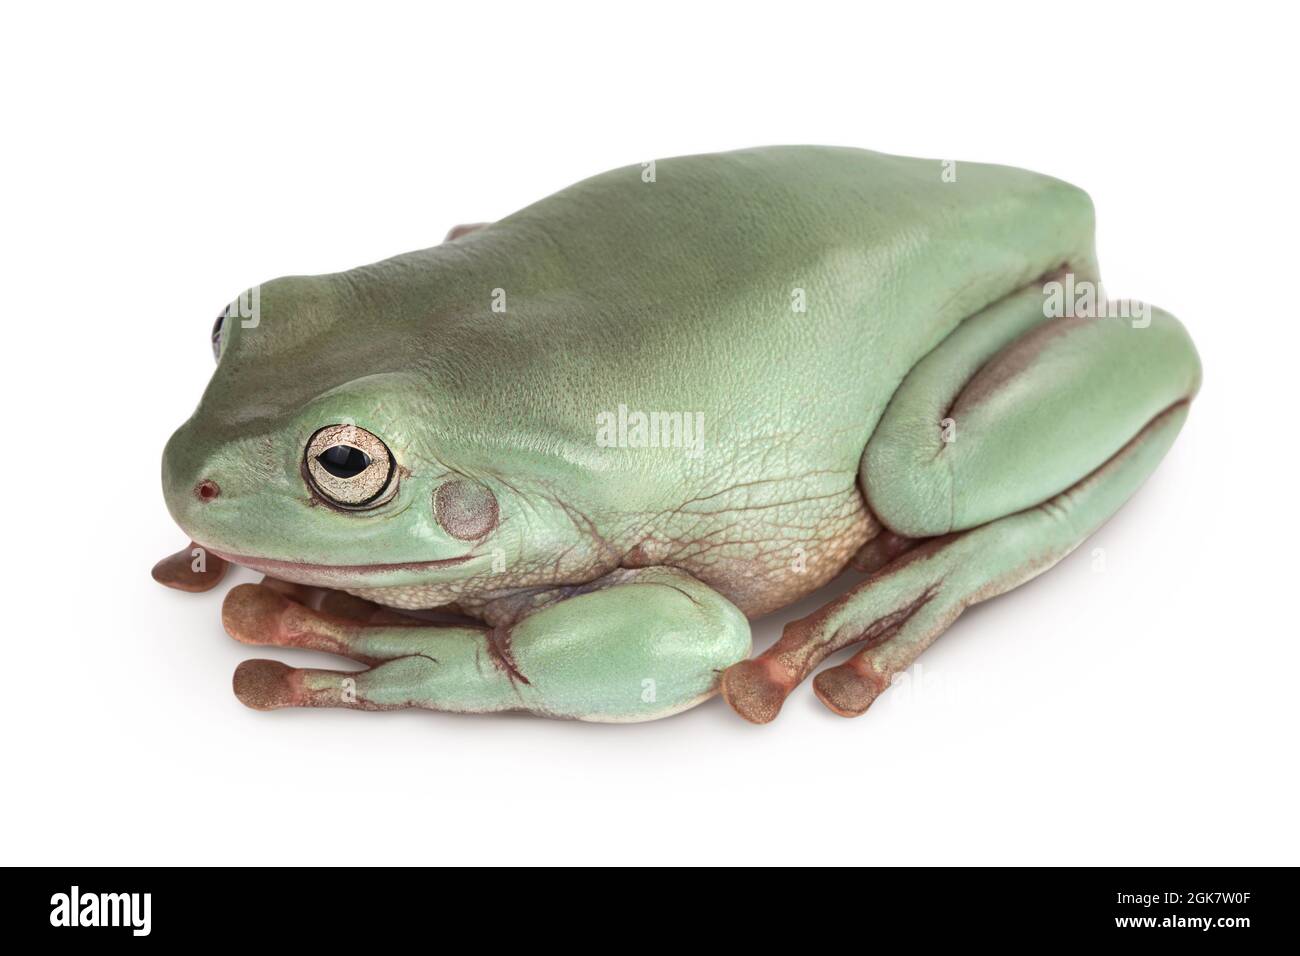 The Australian green tree frog isolated on white background with clipping path and full depth of field Stock Photo